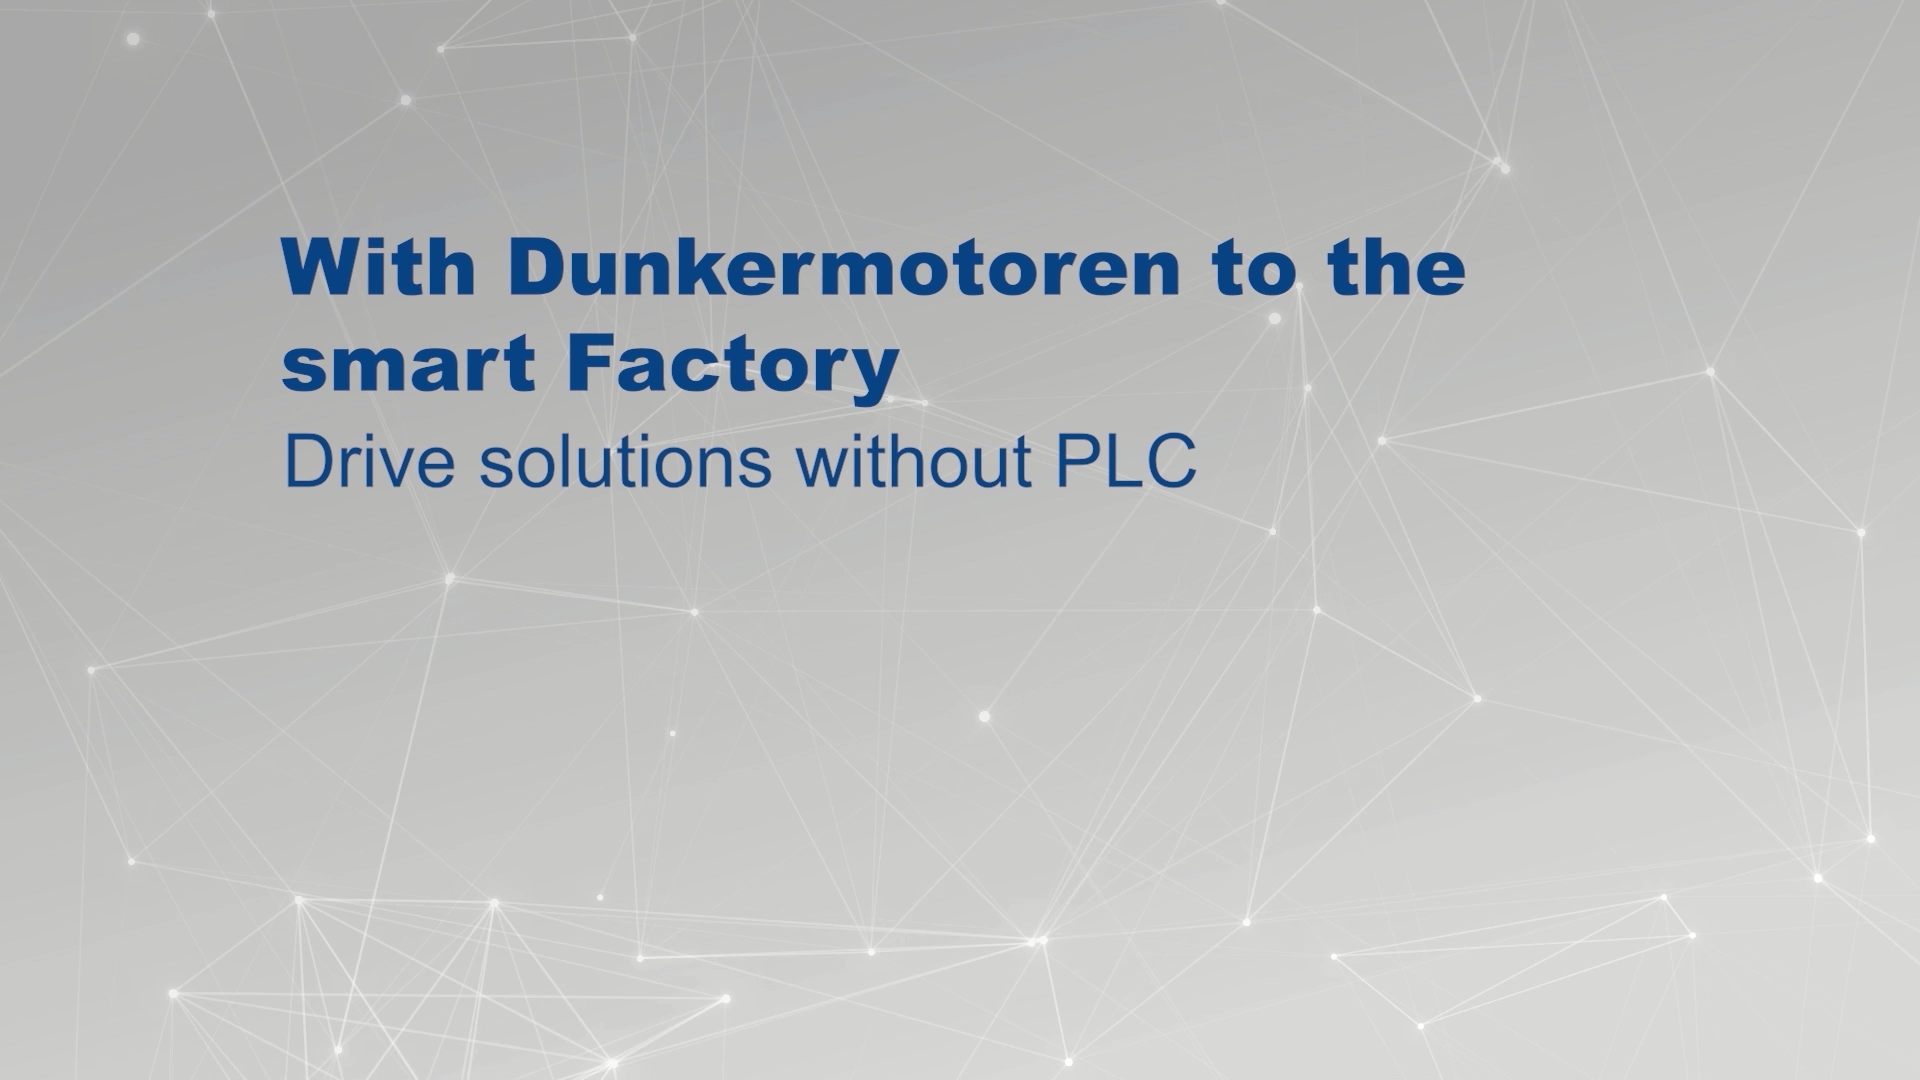 Drive solutions without PLC